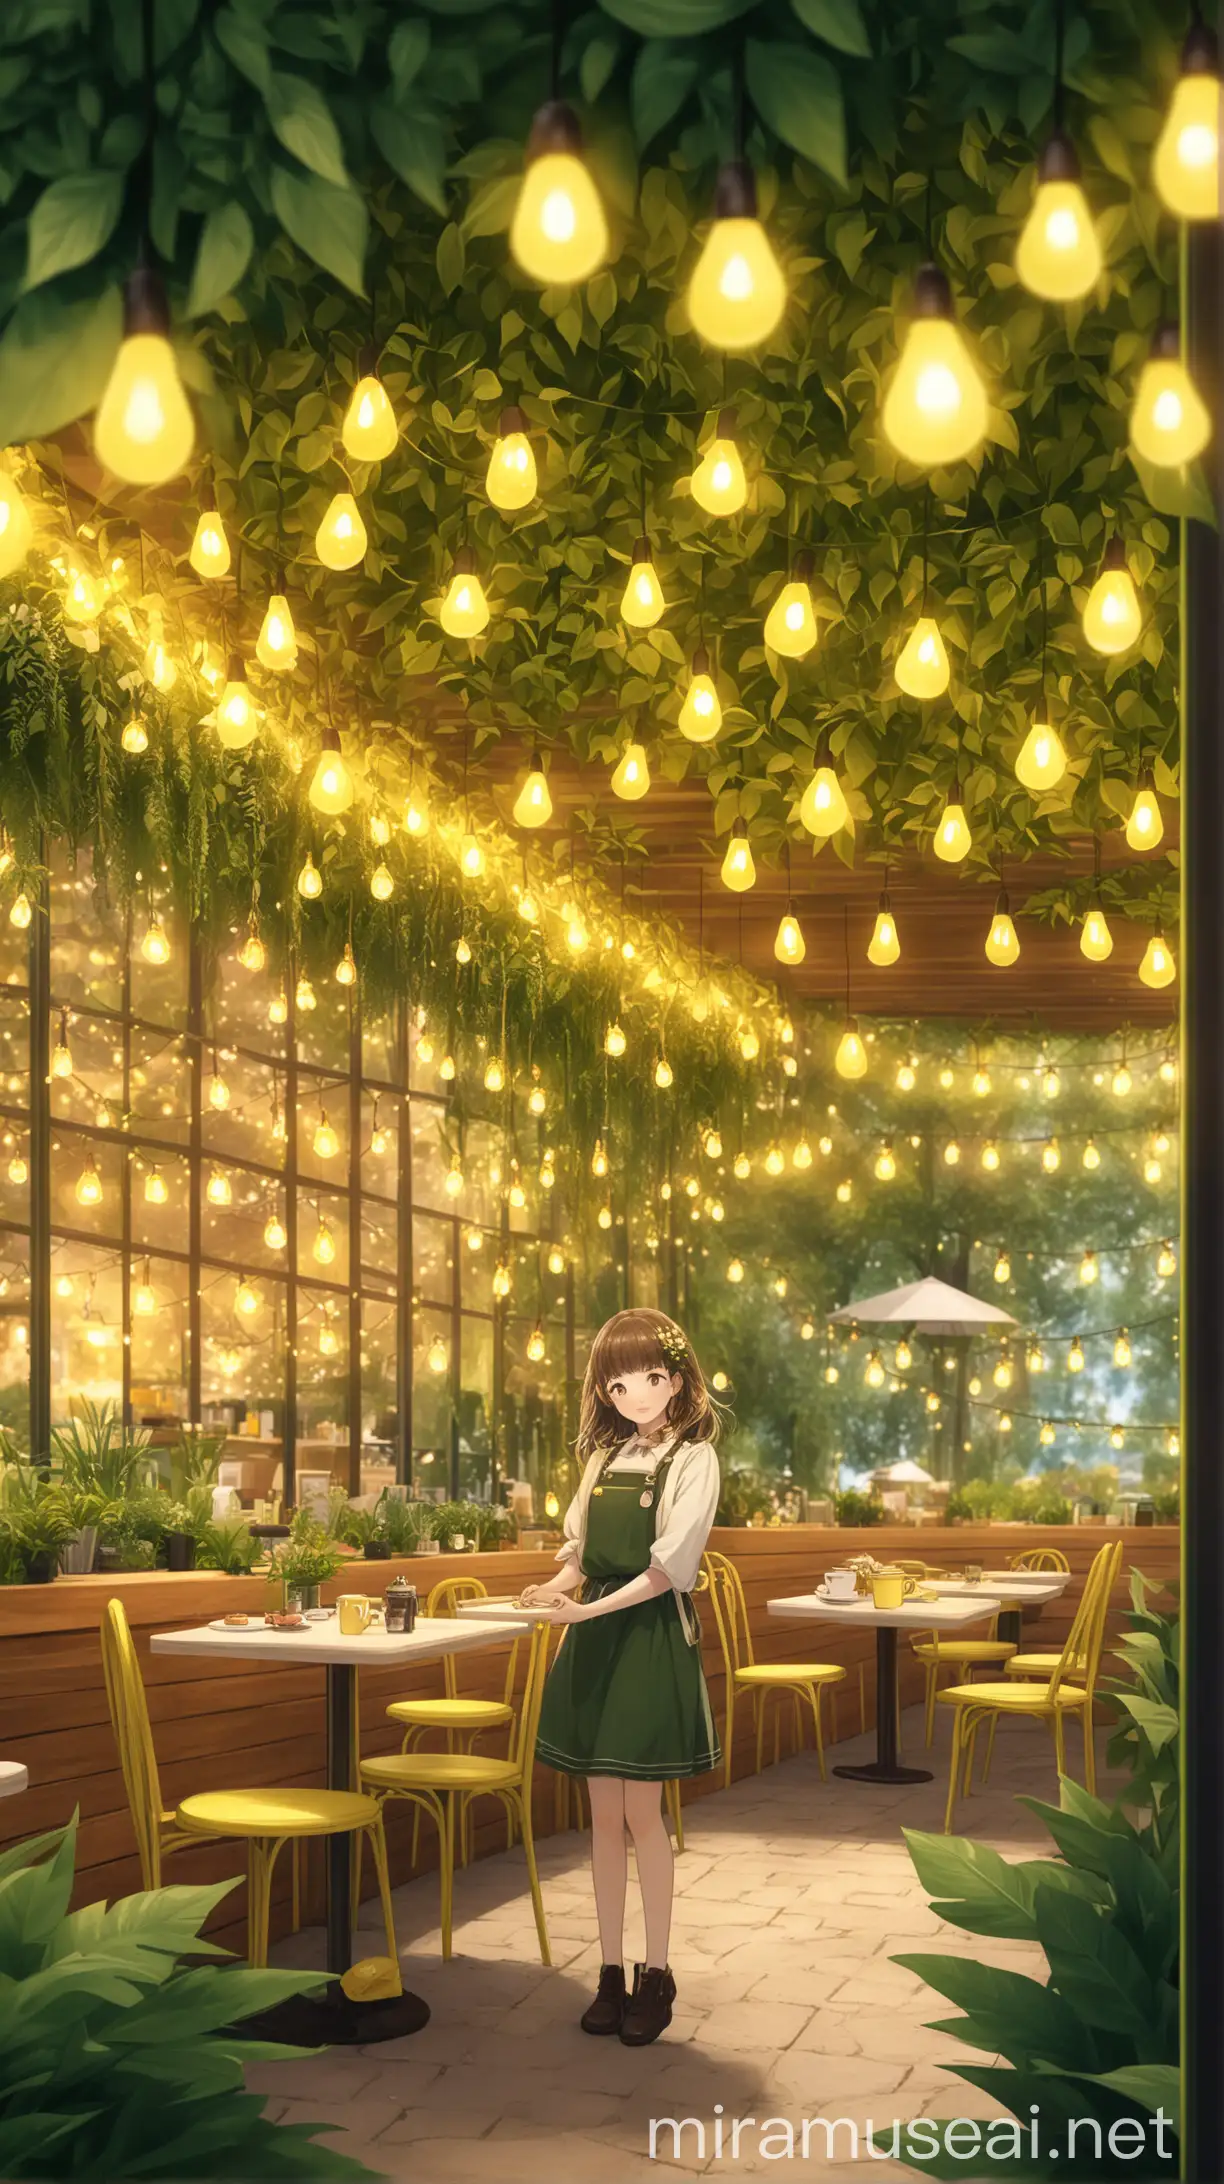 cute girl, outside nature field garden cafe, yellow decorative light, hanging leaves, 